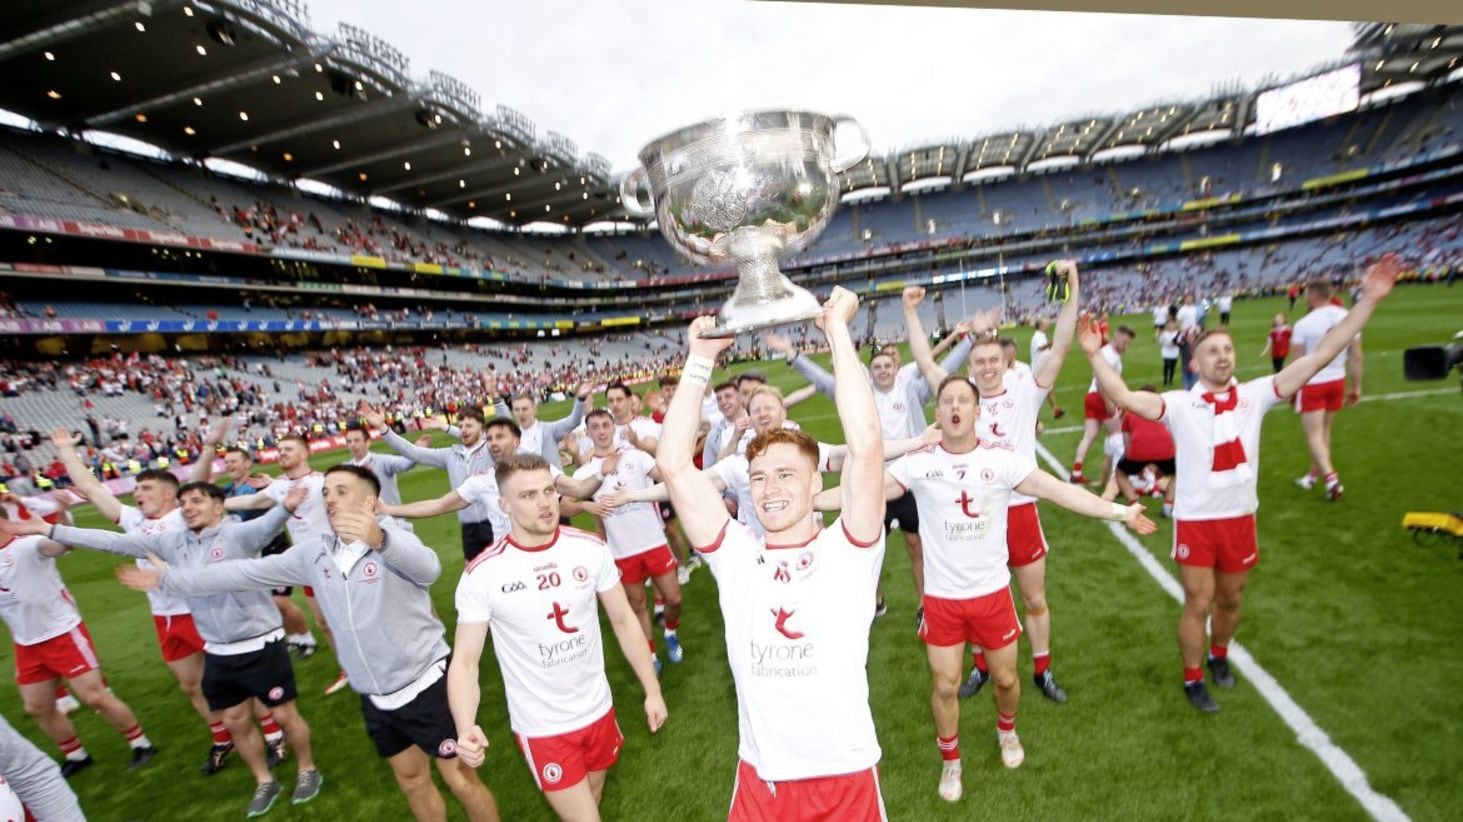 Tyrone&#39;s Conor Meyler lifts the Sam Maguire after their win over Mayo in the All-Ireland SFC final at Croke Park. How many of the Red Hands will feature in your All-Star selections? 						Picture: Philip Walsh. 